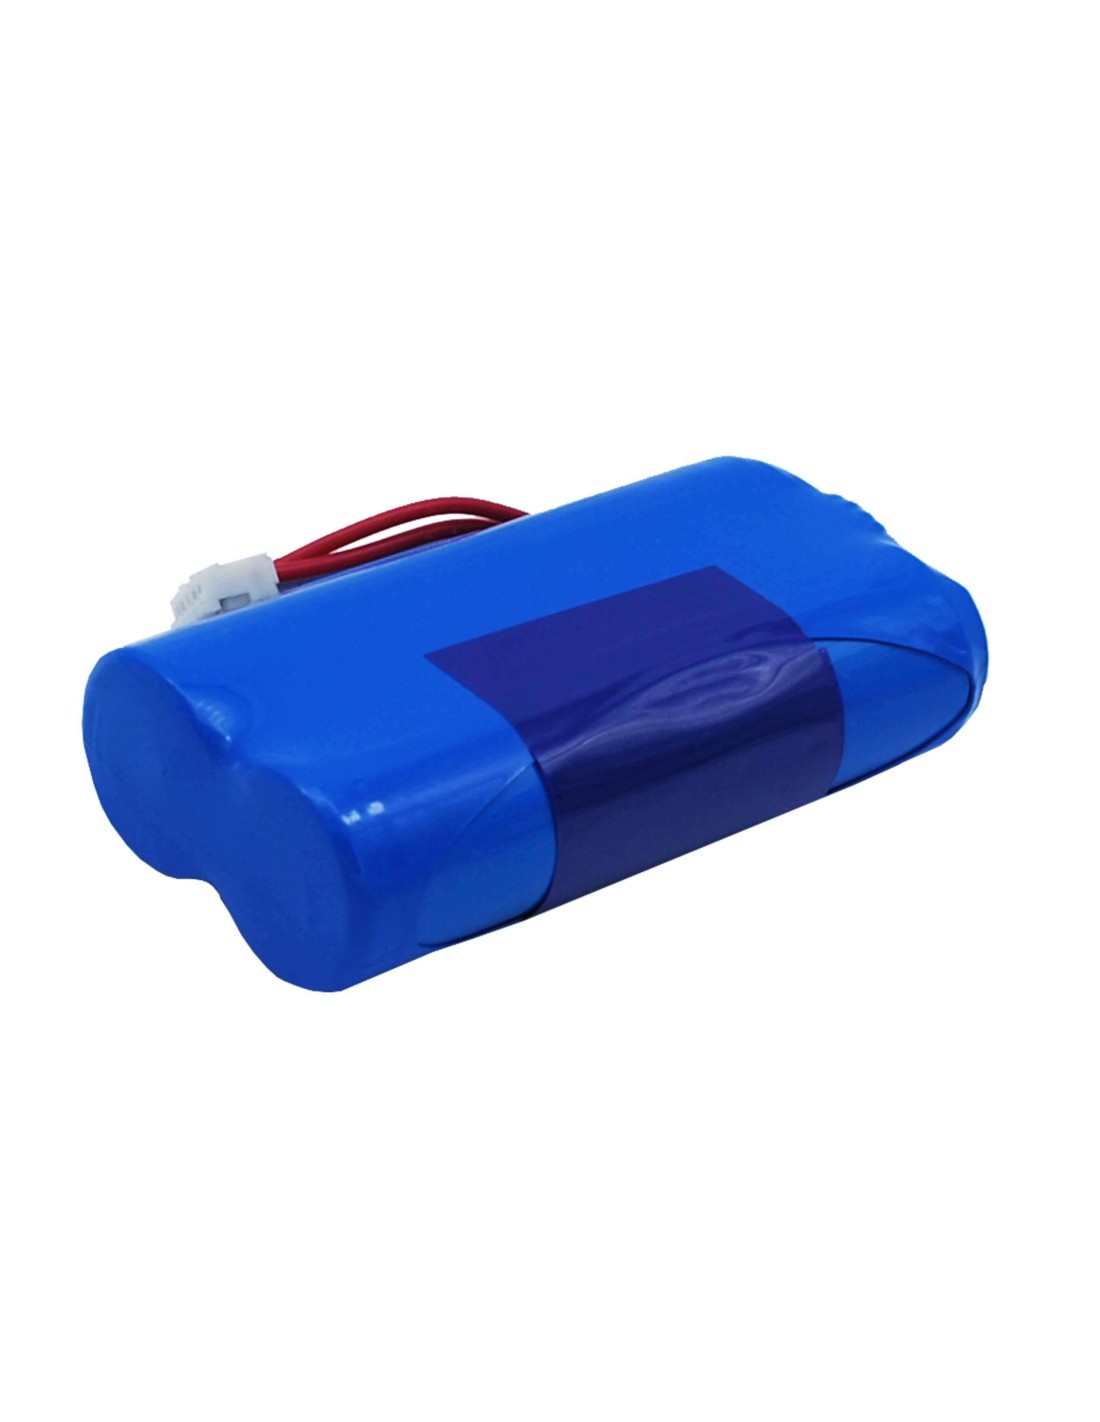 Battery for Newpos New8210, New 8210 7.4V, 2600mAh - 19.24Wh